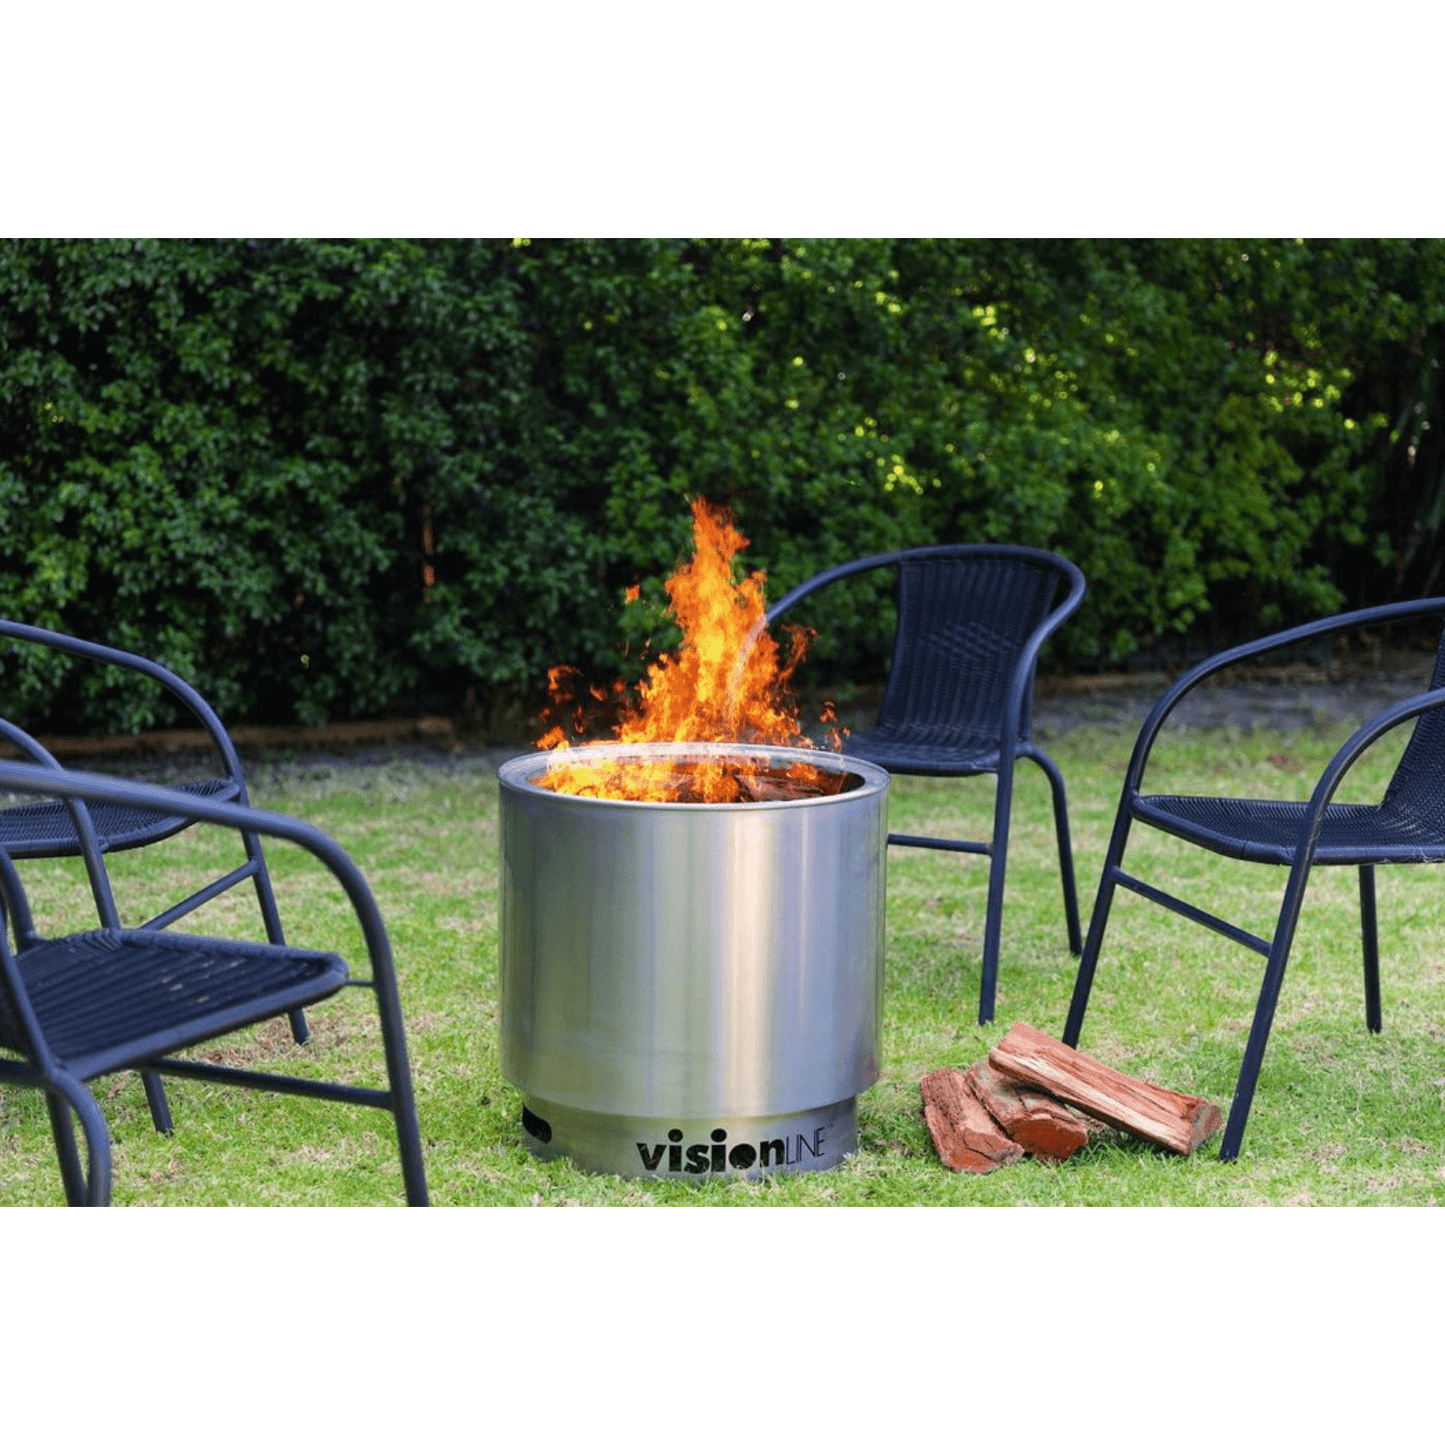 VISIONLINE FIRE PIT STAINLESS STEEL - Horizon Leisure